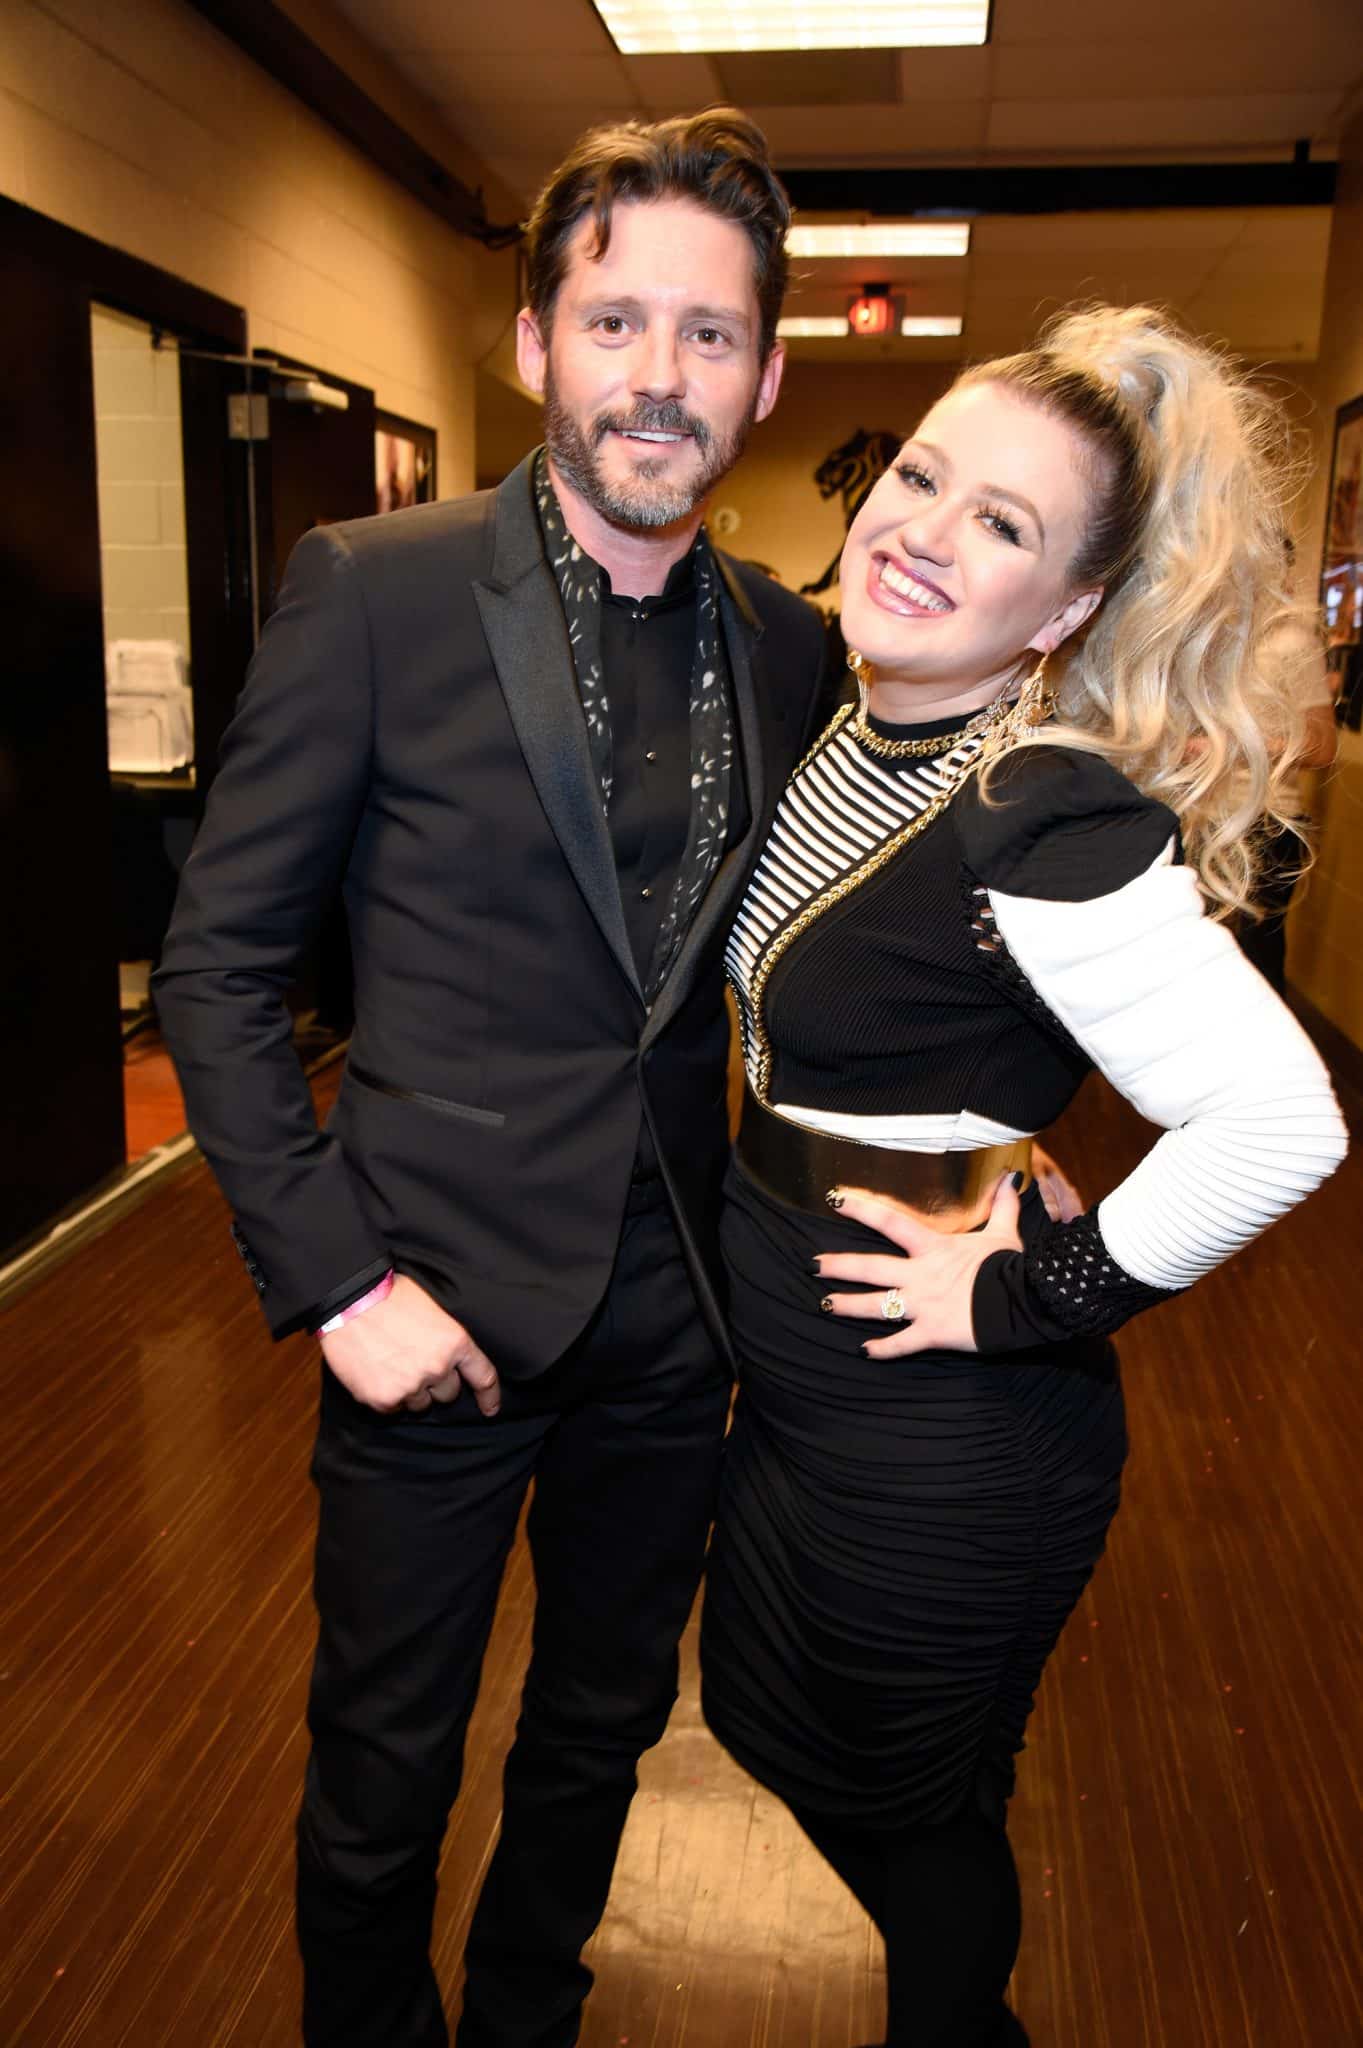 Kelly Clarkson and her ex-husband Brandon Blackstock will go to trial in August